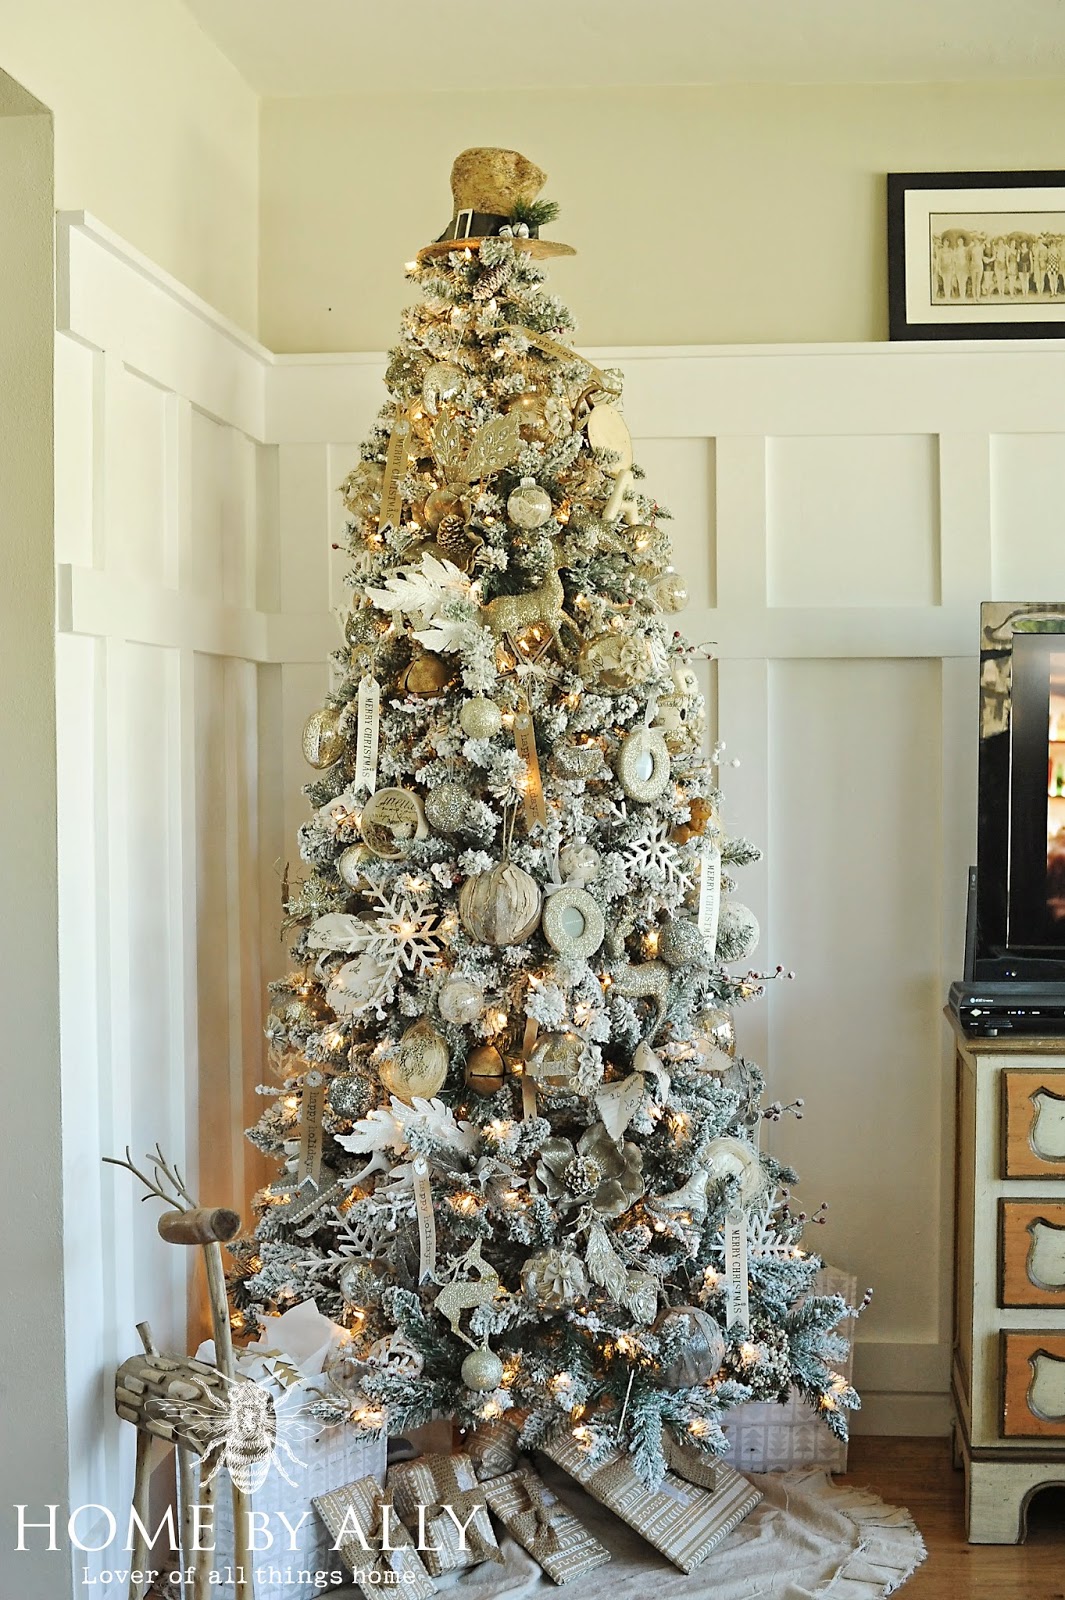 Home by Ally: Our 2014 Christmas Tree